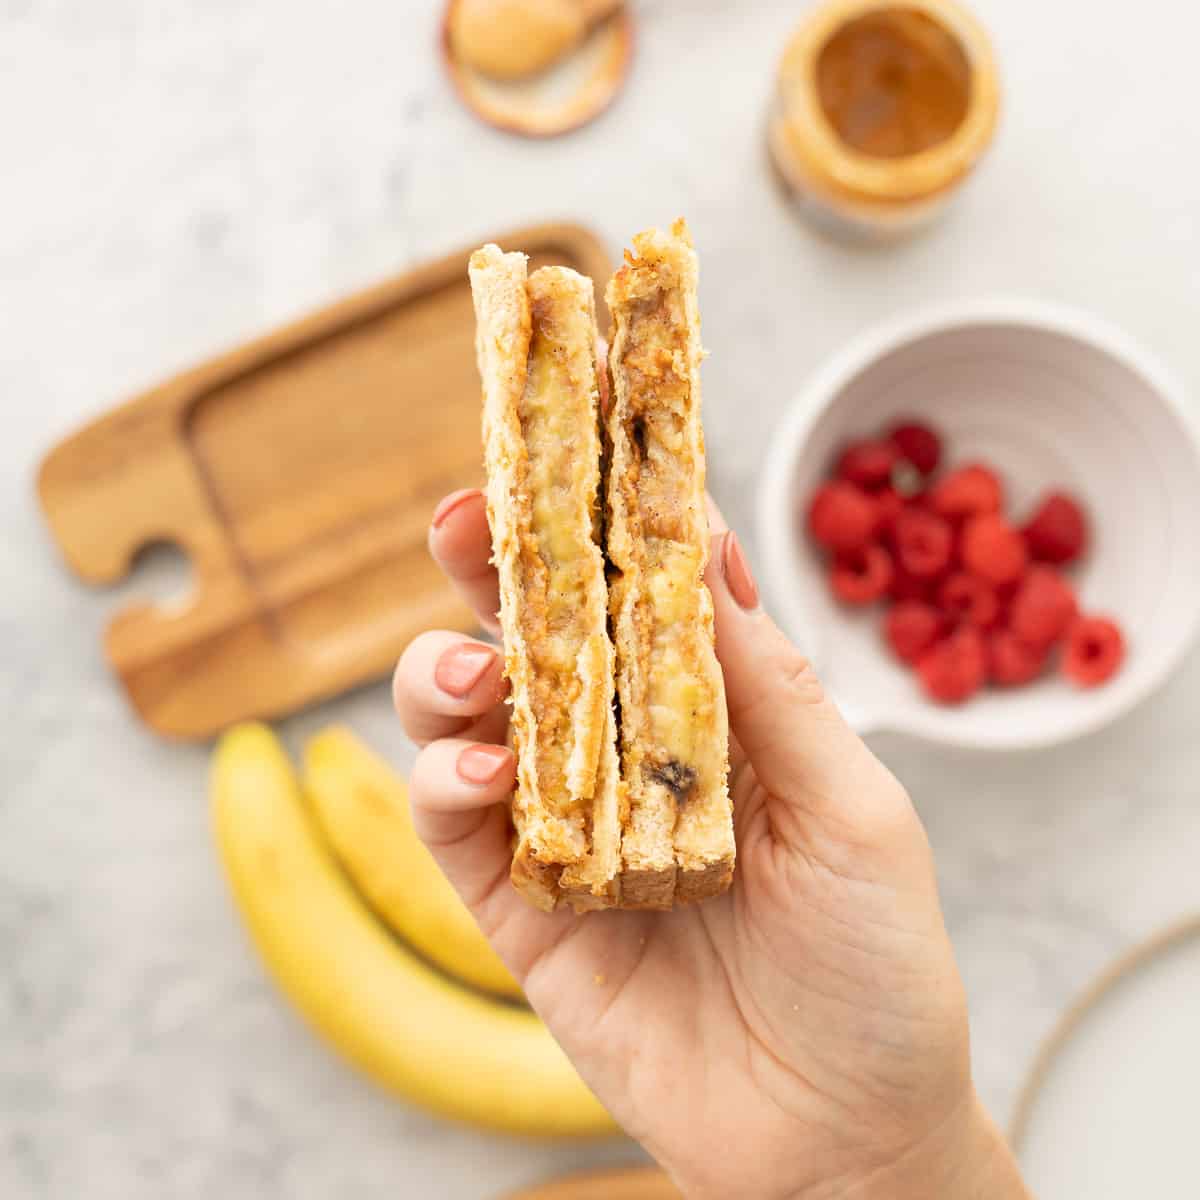 A hand raised above a chopping board holding a halved peanut butter banana sandwich. Next to the wooden chopping board is a ceramic bowl of raspberries and two bananas 